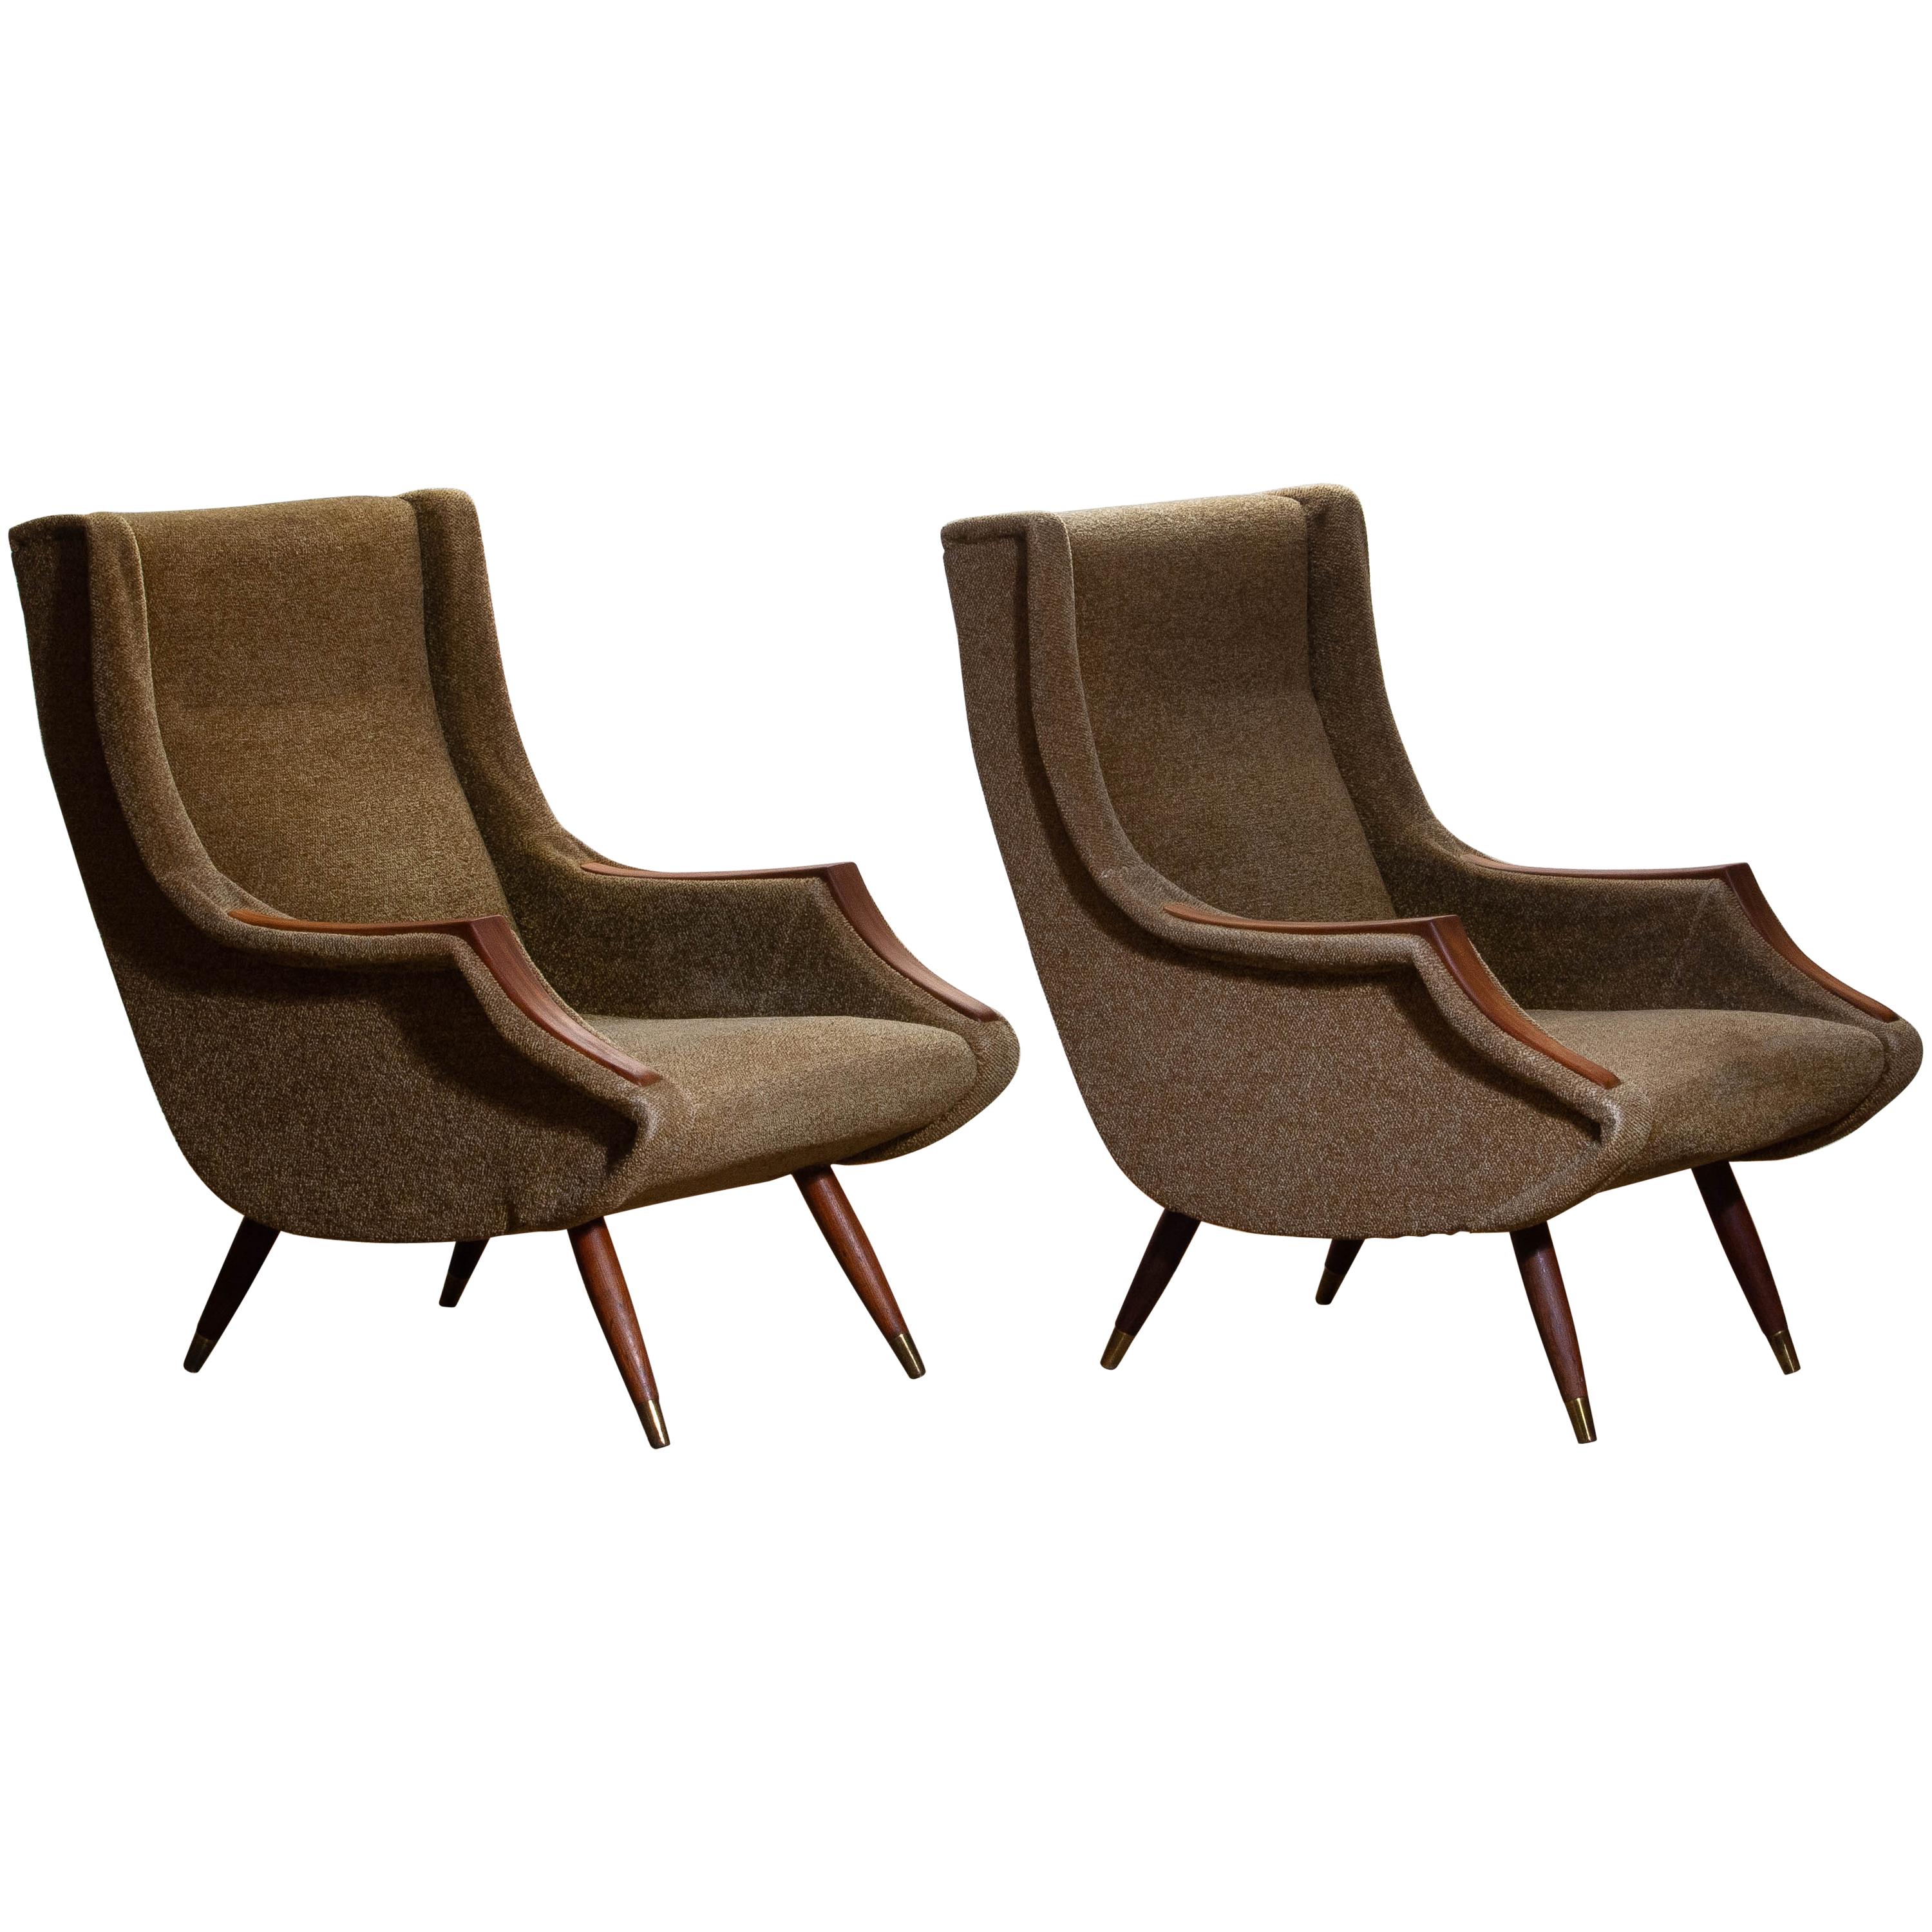 Set Italian Lounge / Easy Chairs from the 1950s by Aldo Morbelli for Isa Bergamo